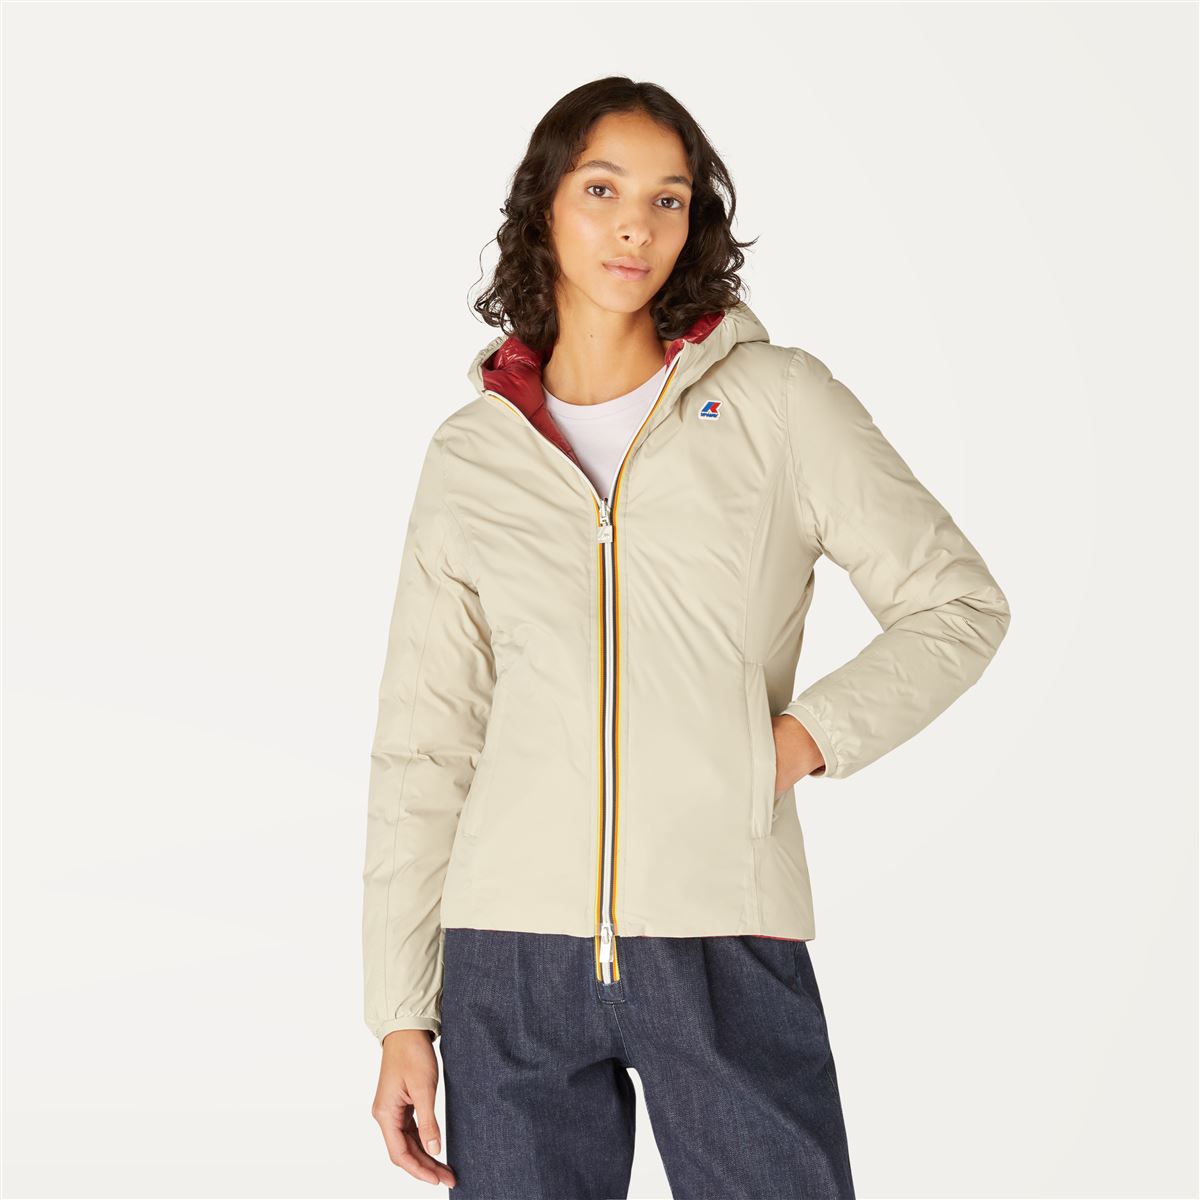 LILY THERMO PLUS.2 REVERSIBLE - Jackets - Short - Woman - Beige Red